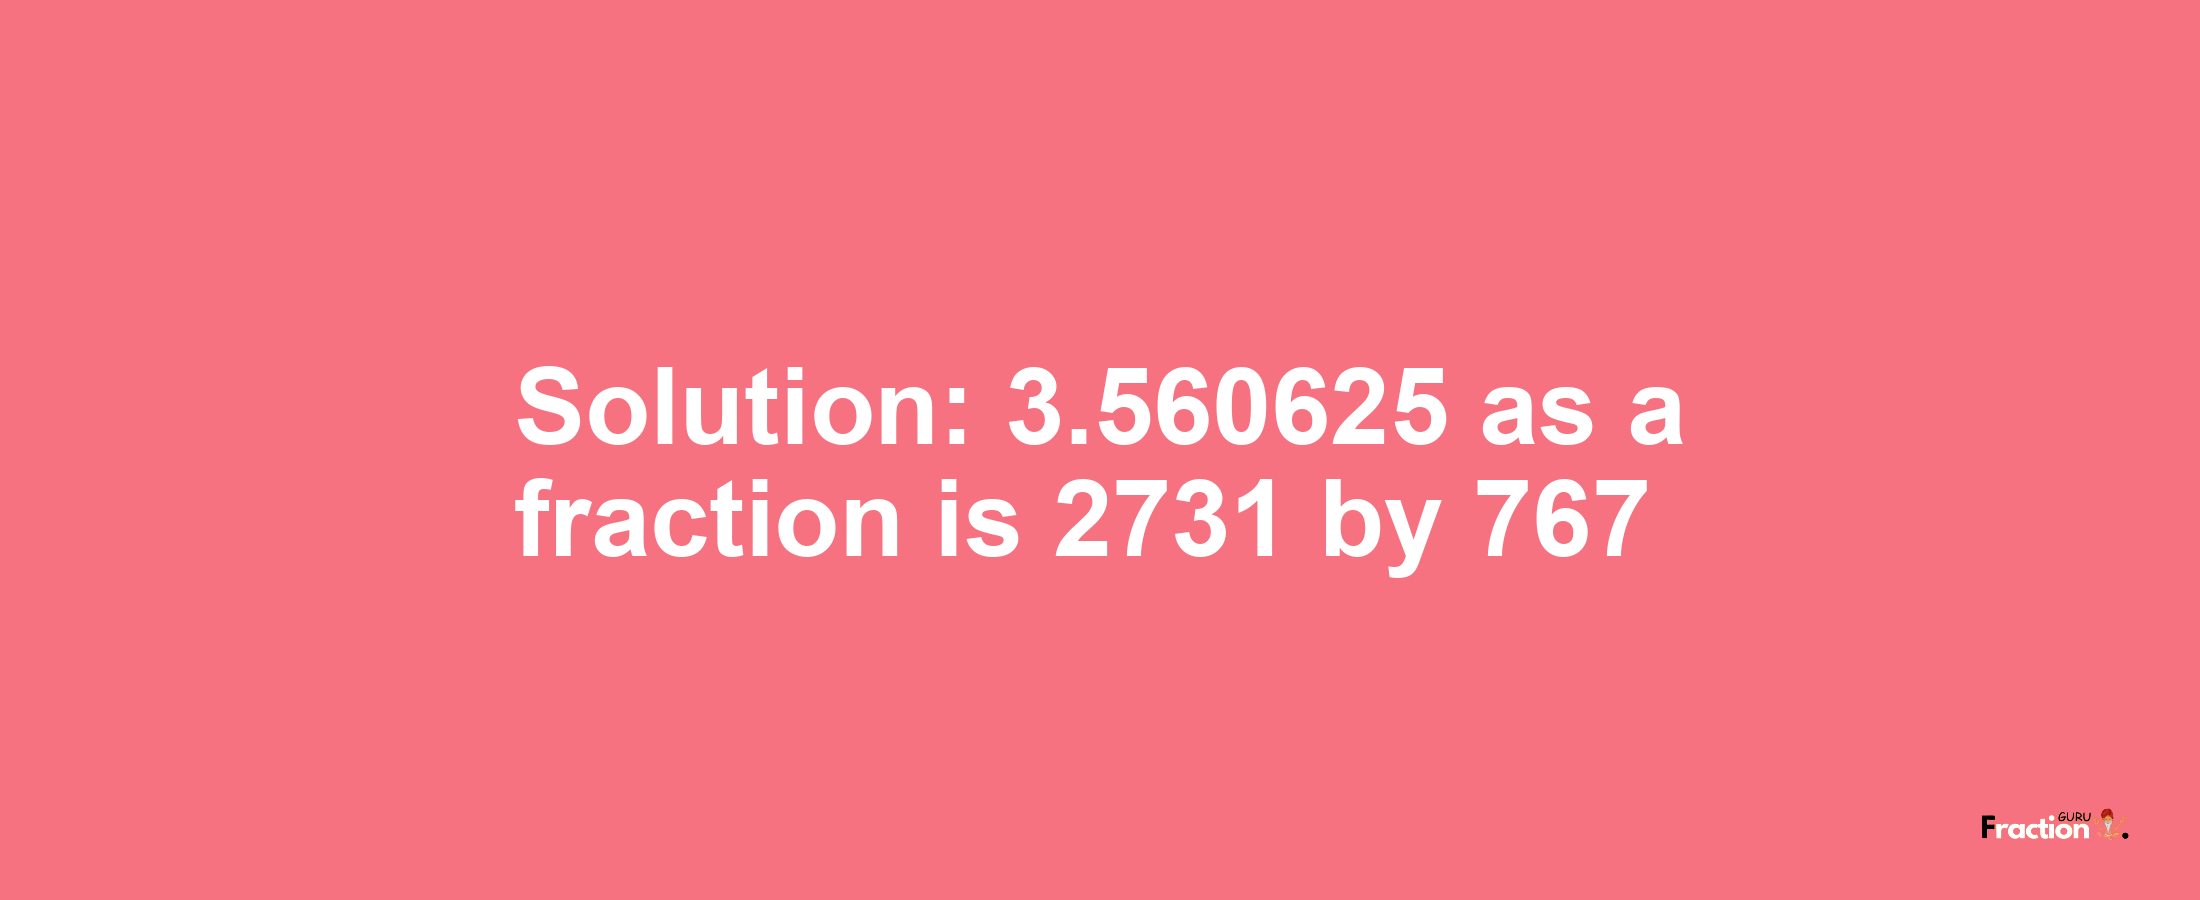 Solution:3.560625 as a fraction is 2731/767